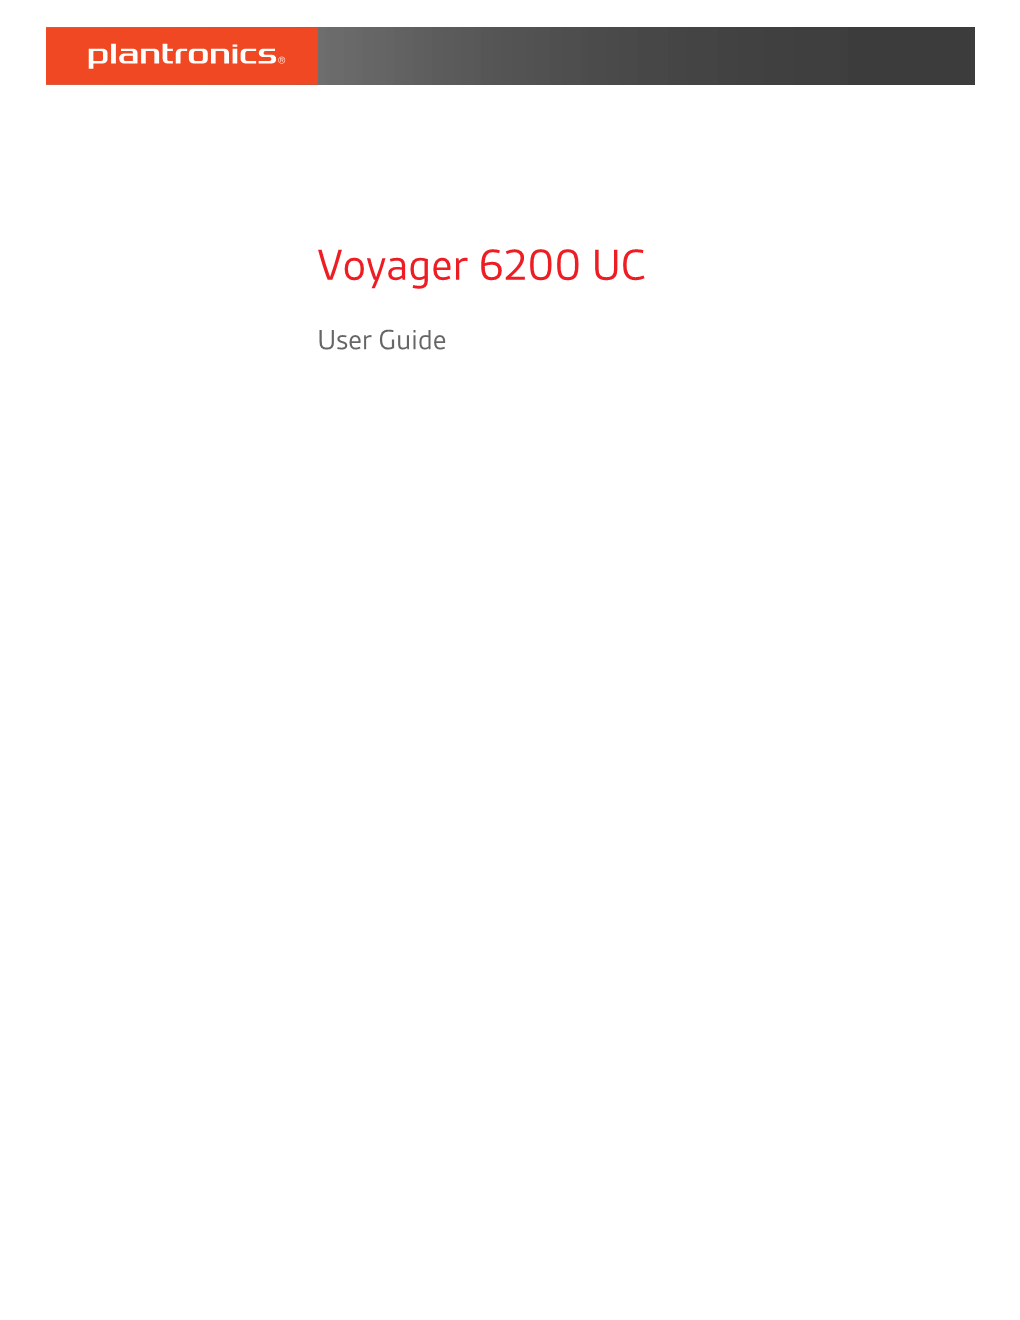 Voyager 6200 UC